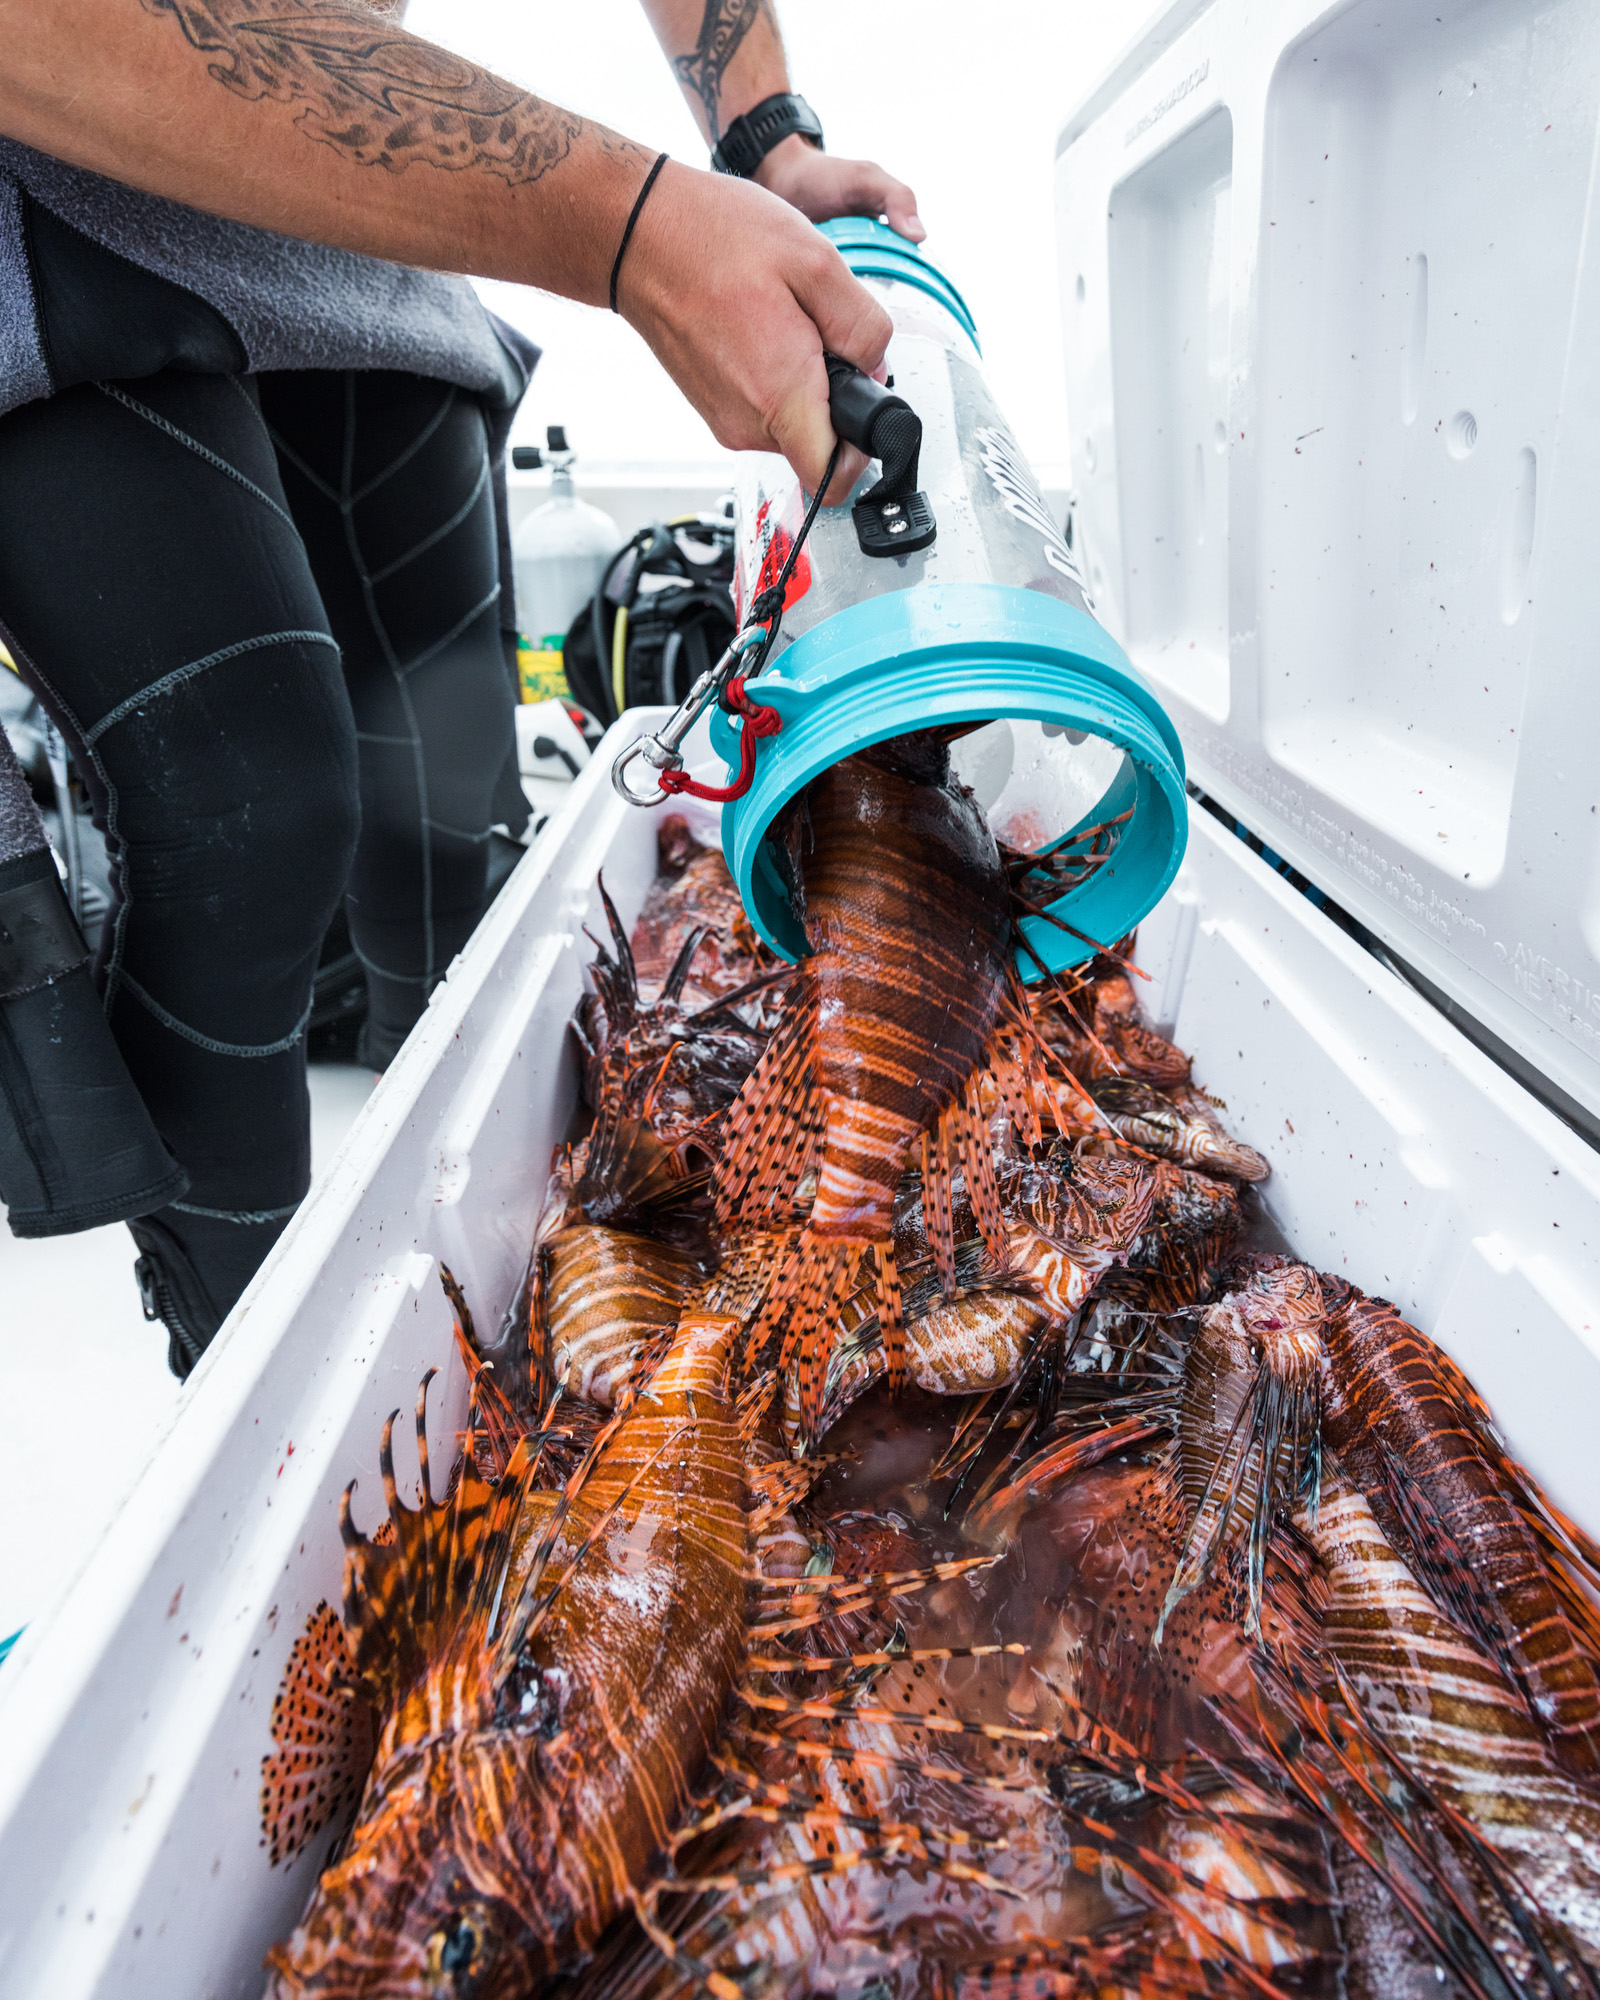 Emptying a tube of lionfish into a cooler.